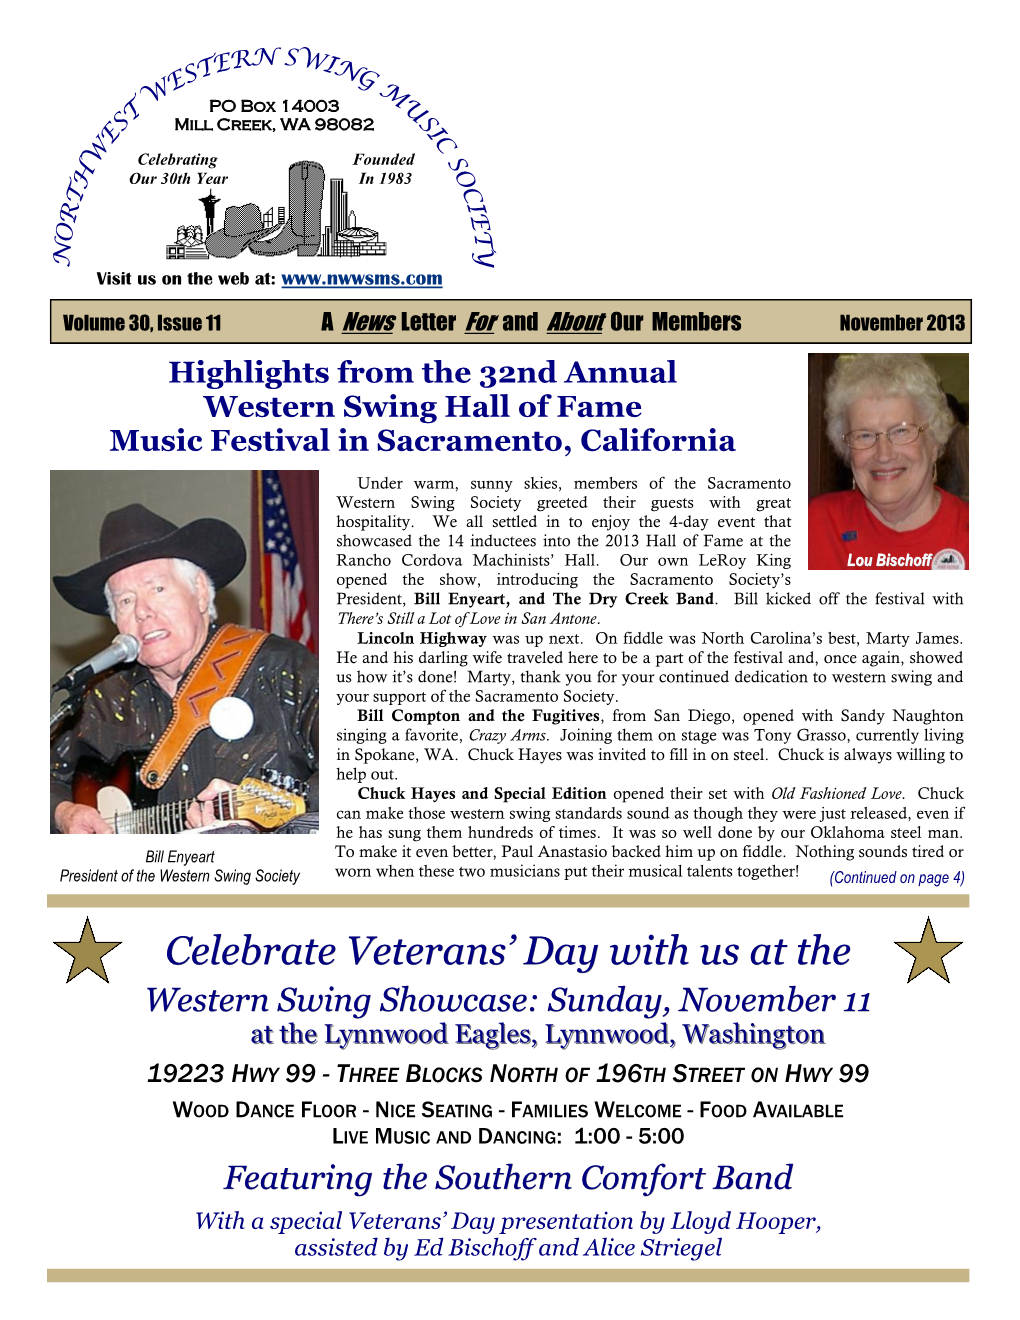 Celebrate Veterans' Day with Us At